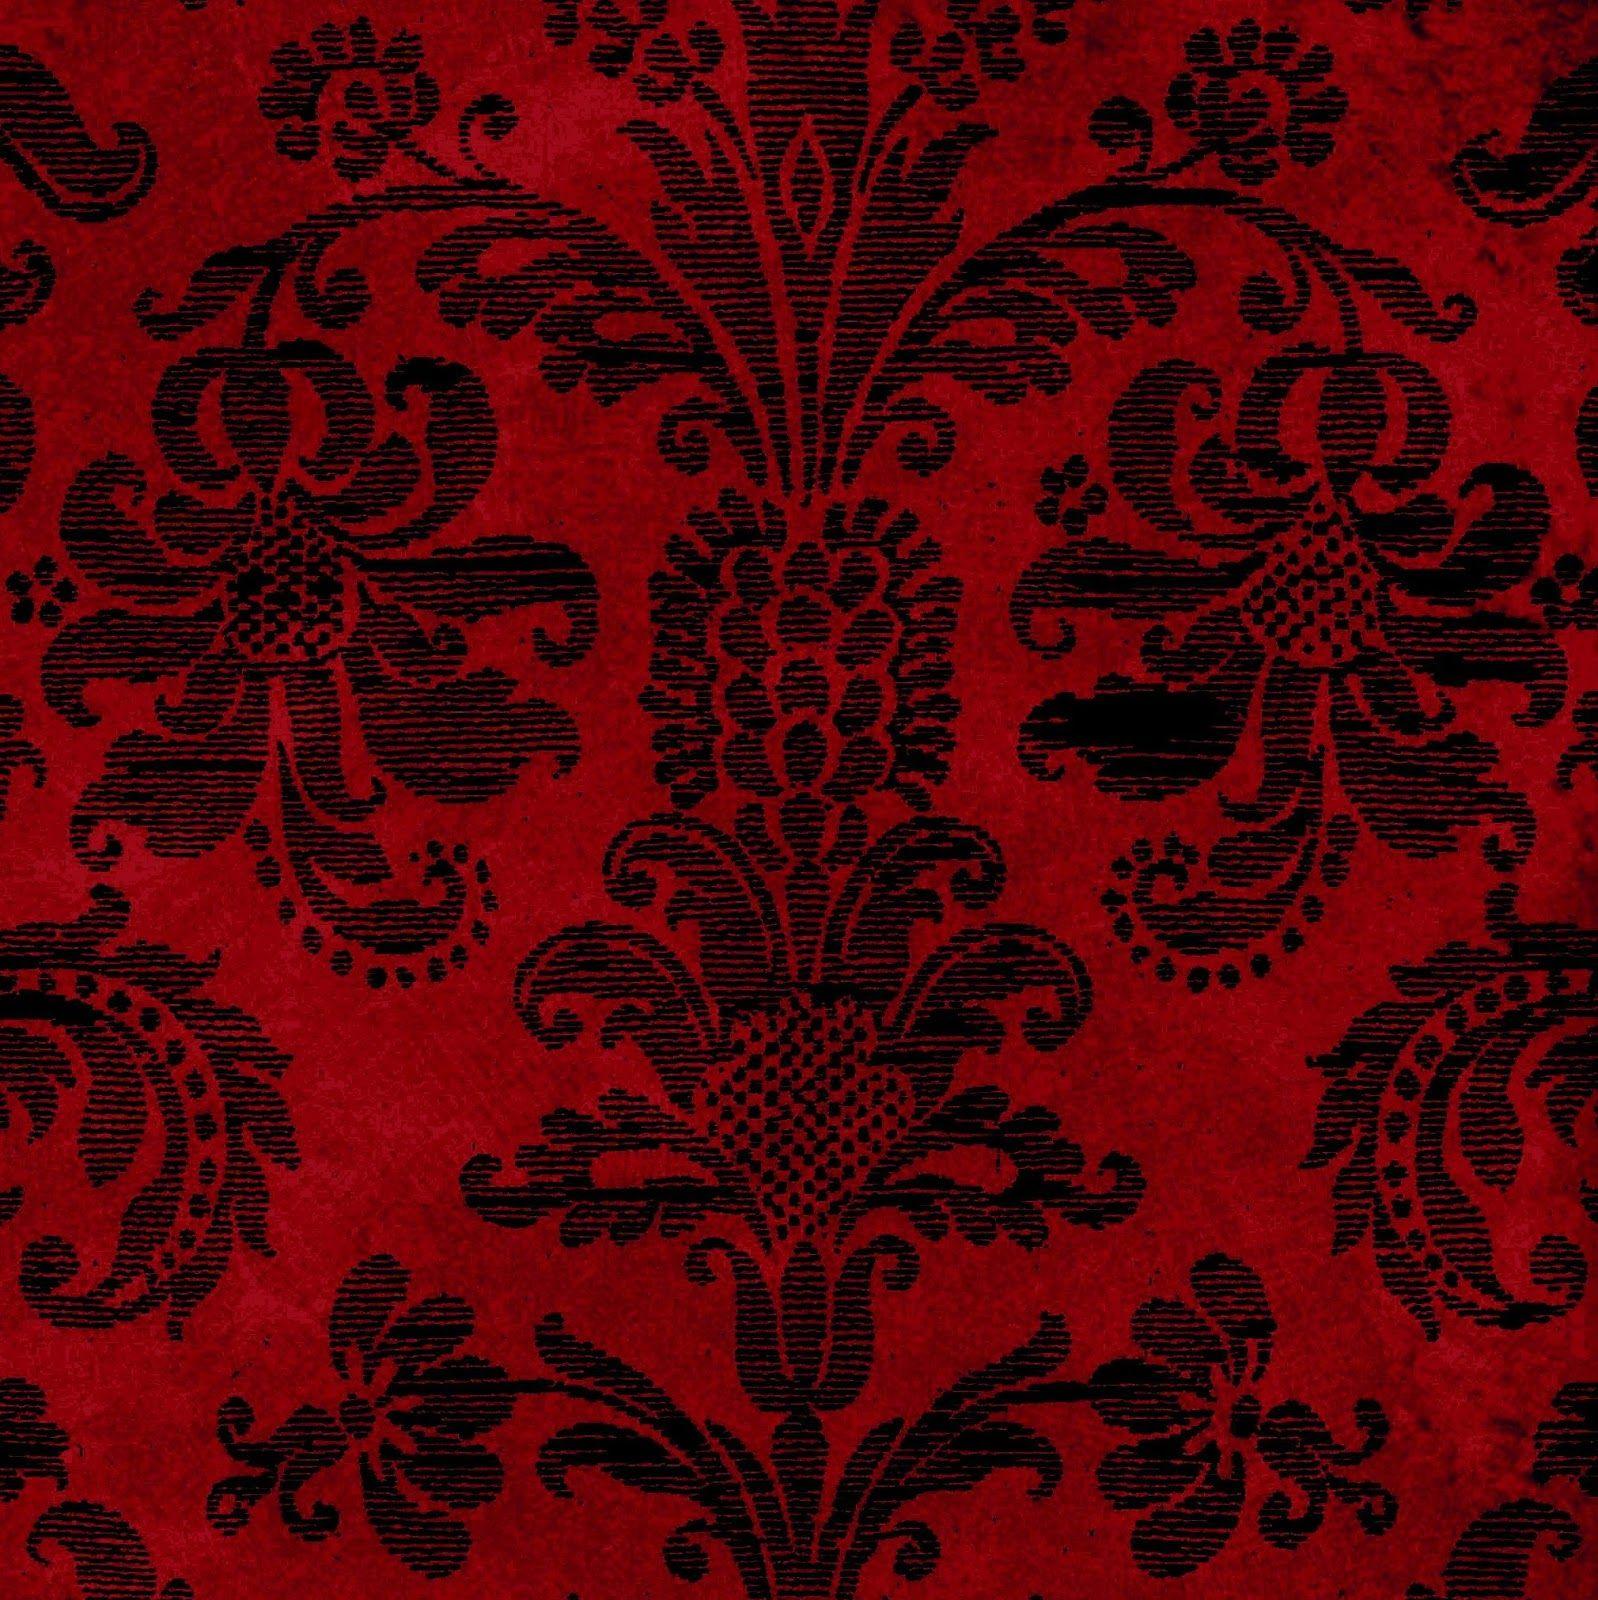 Red Bandana Wallpaper for iPhone